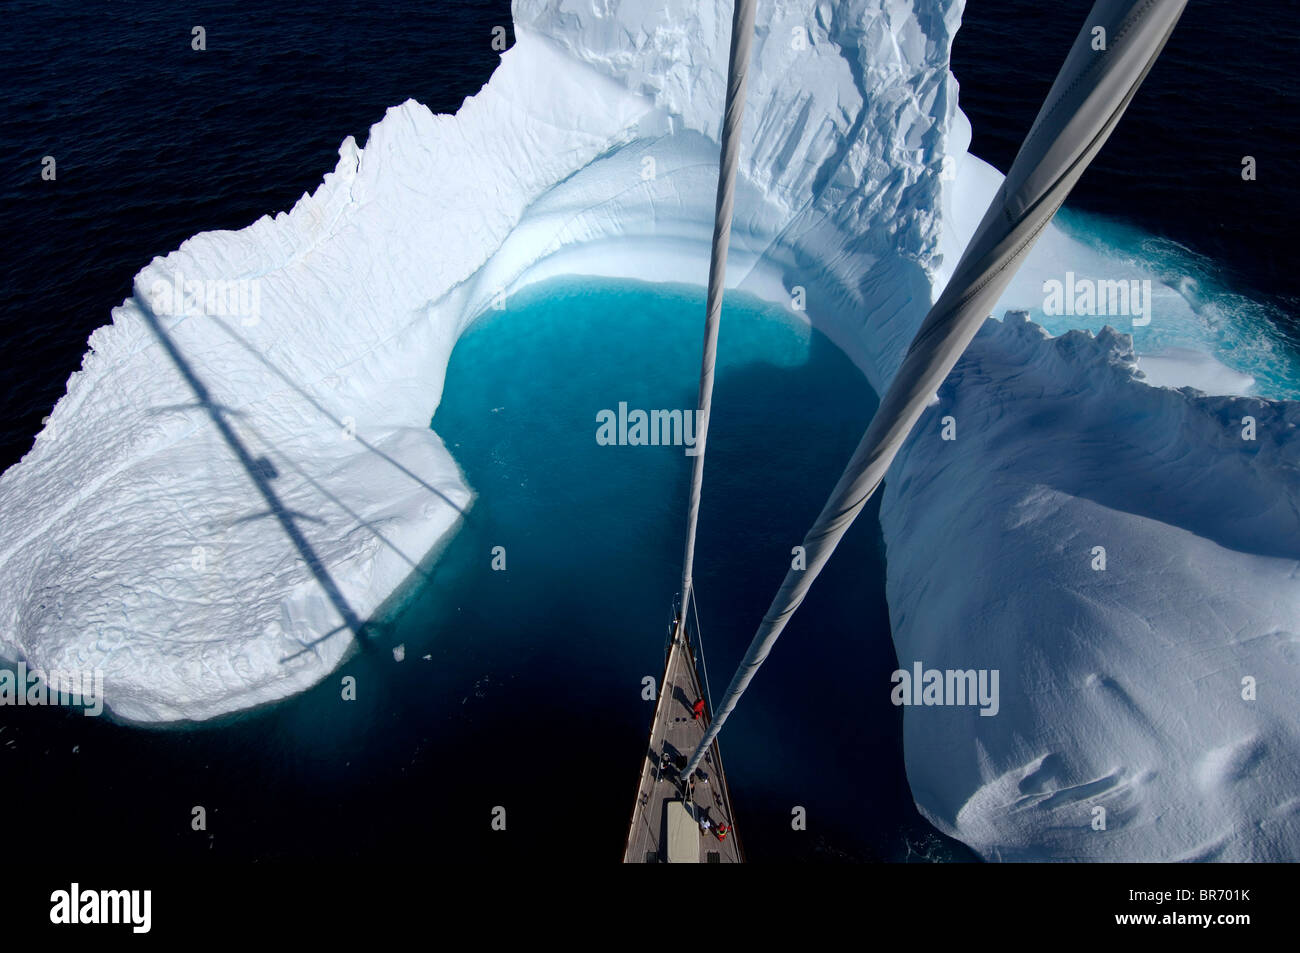 Aerial view, taken from the mast, of SY 'Adele''s bow in the bay of an iceberg, Portal Point, Reclus Pennisula, Antarctica, Janu Stock Photo